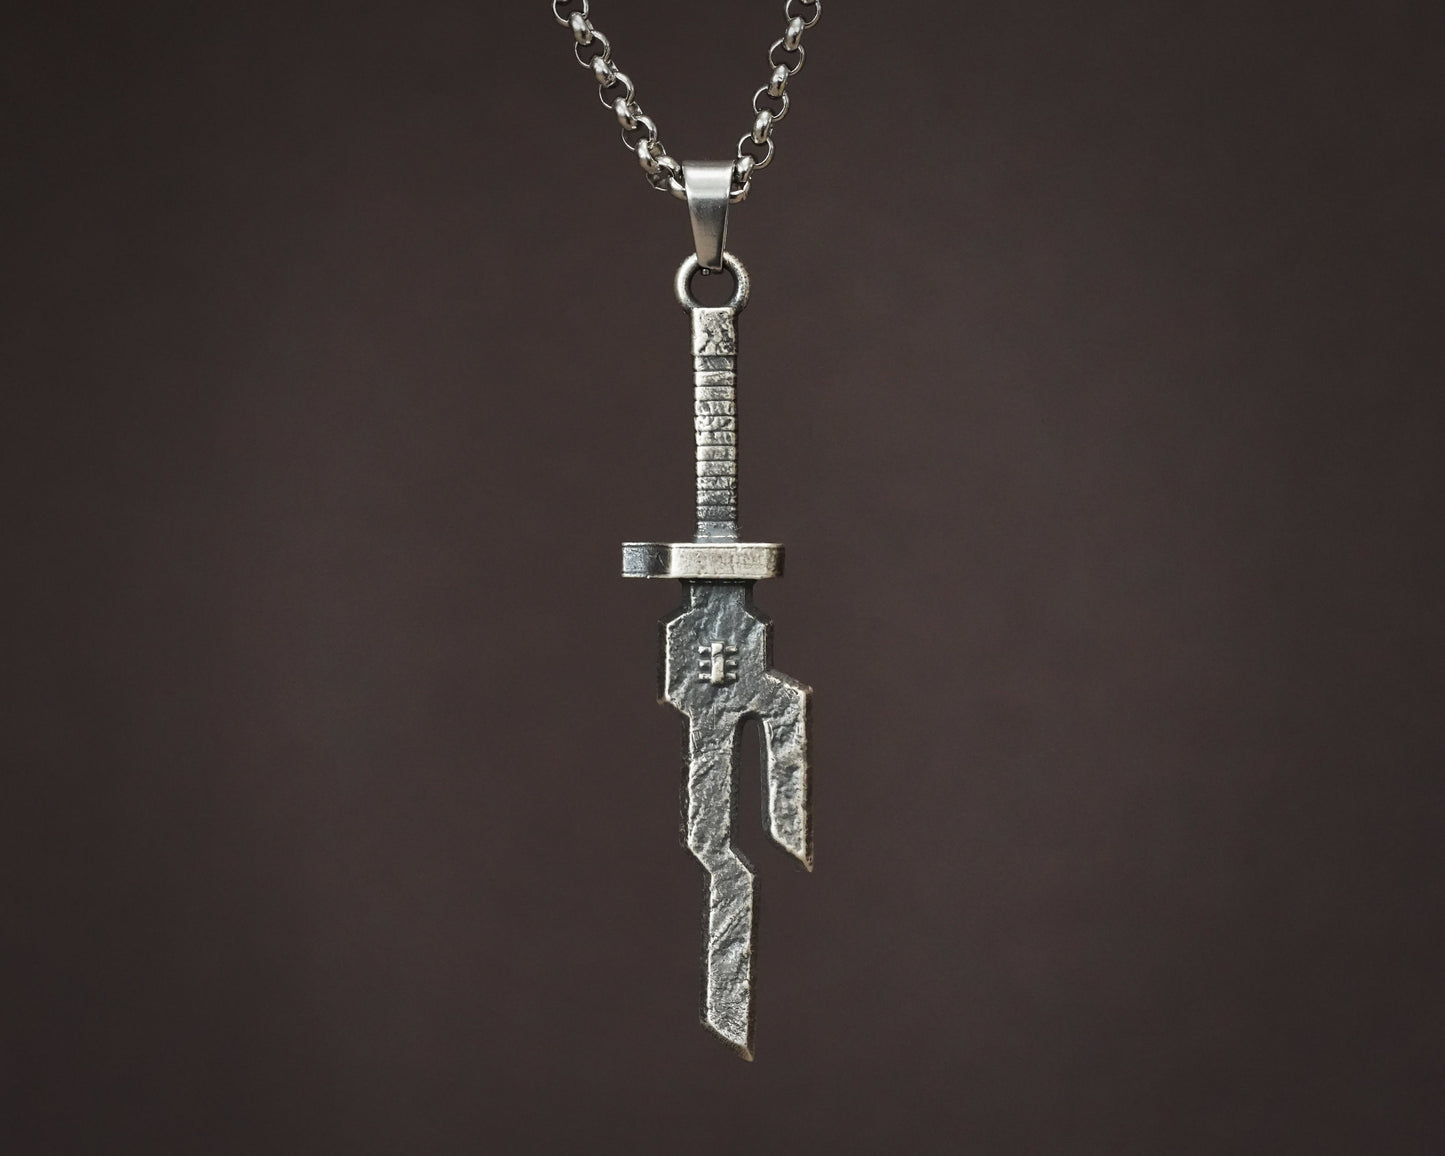 Toji ISoH Spear Necklace Pendant With 22 Inches Chain - Solid Silver or Ancient Bronze Looking Jewelry - Baldur Jewelry